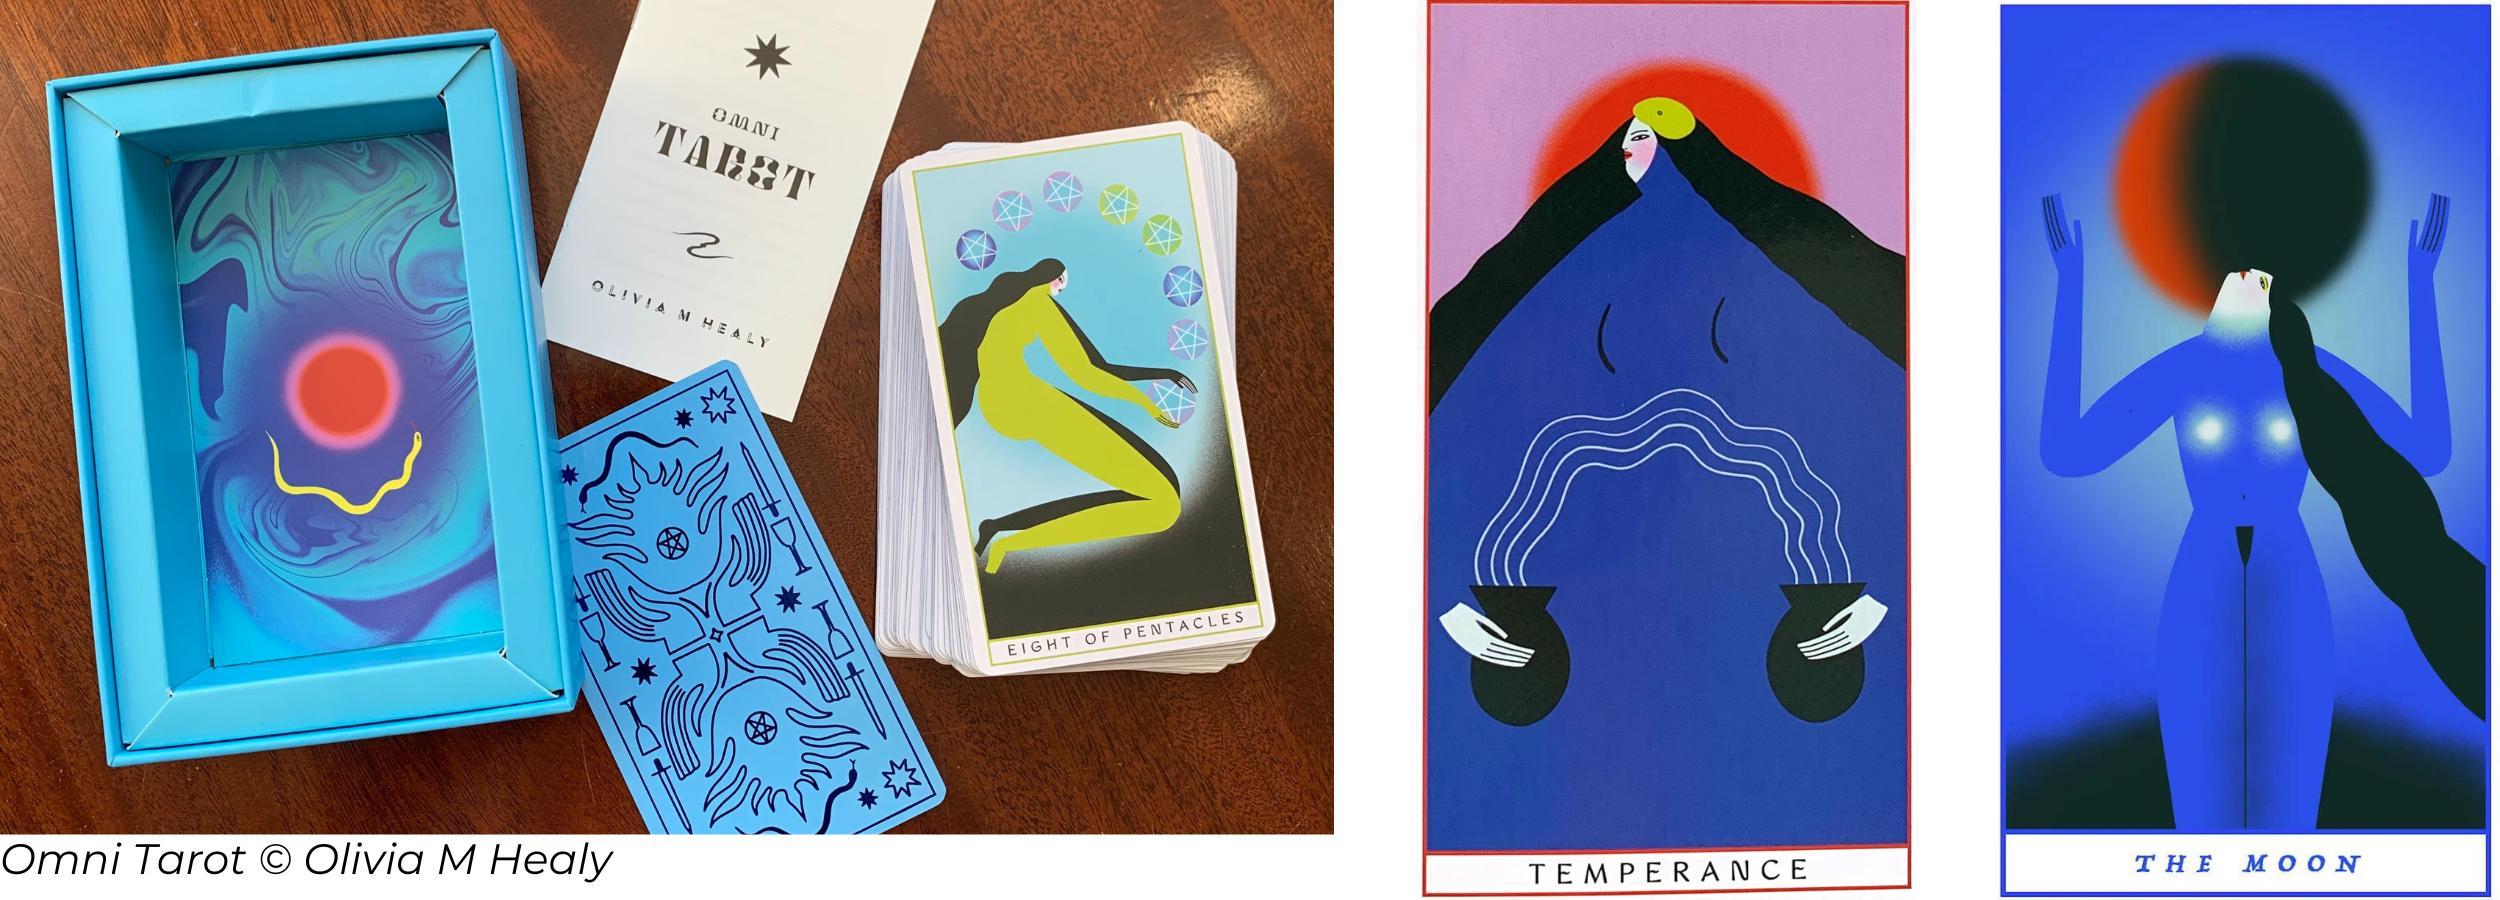 Omni Tarot deck and cards by Olivia M Healy